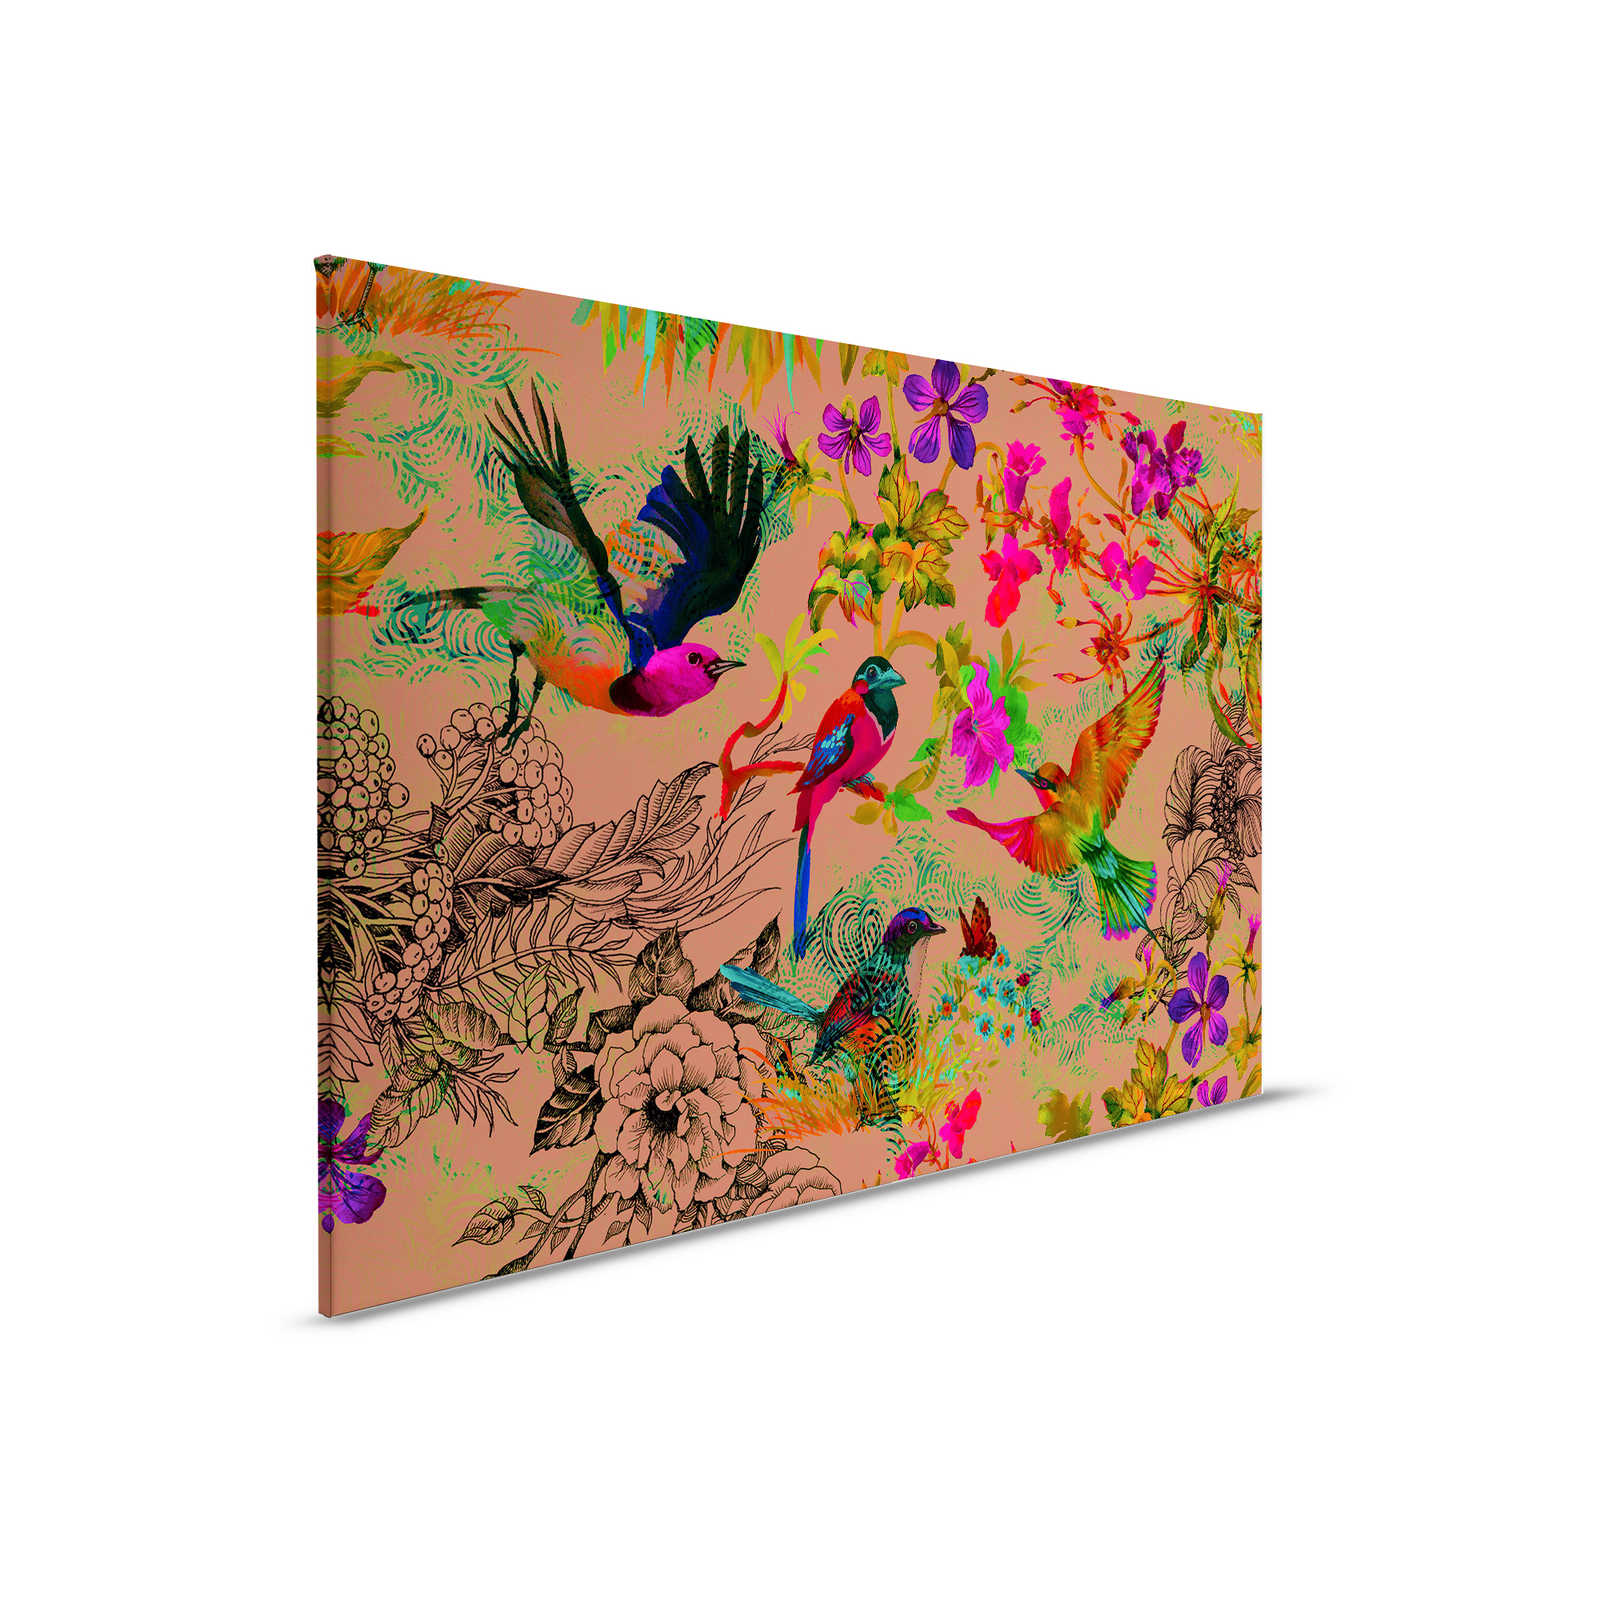         Bird Canvas Painting in Colourful Collage Style - 0.90 m x 0.60 m
    